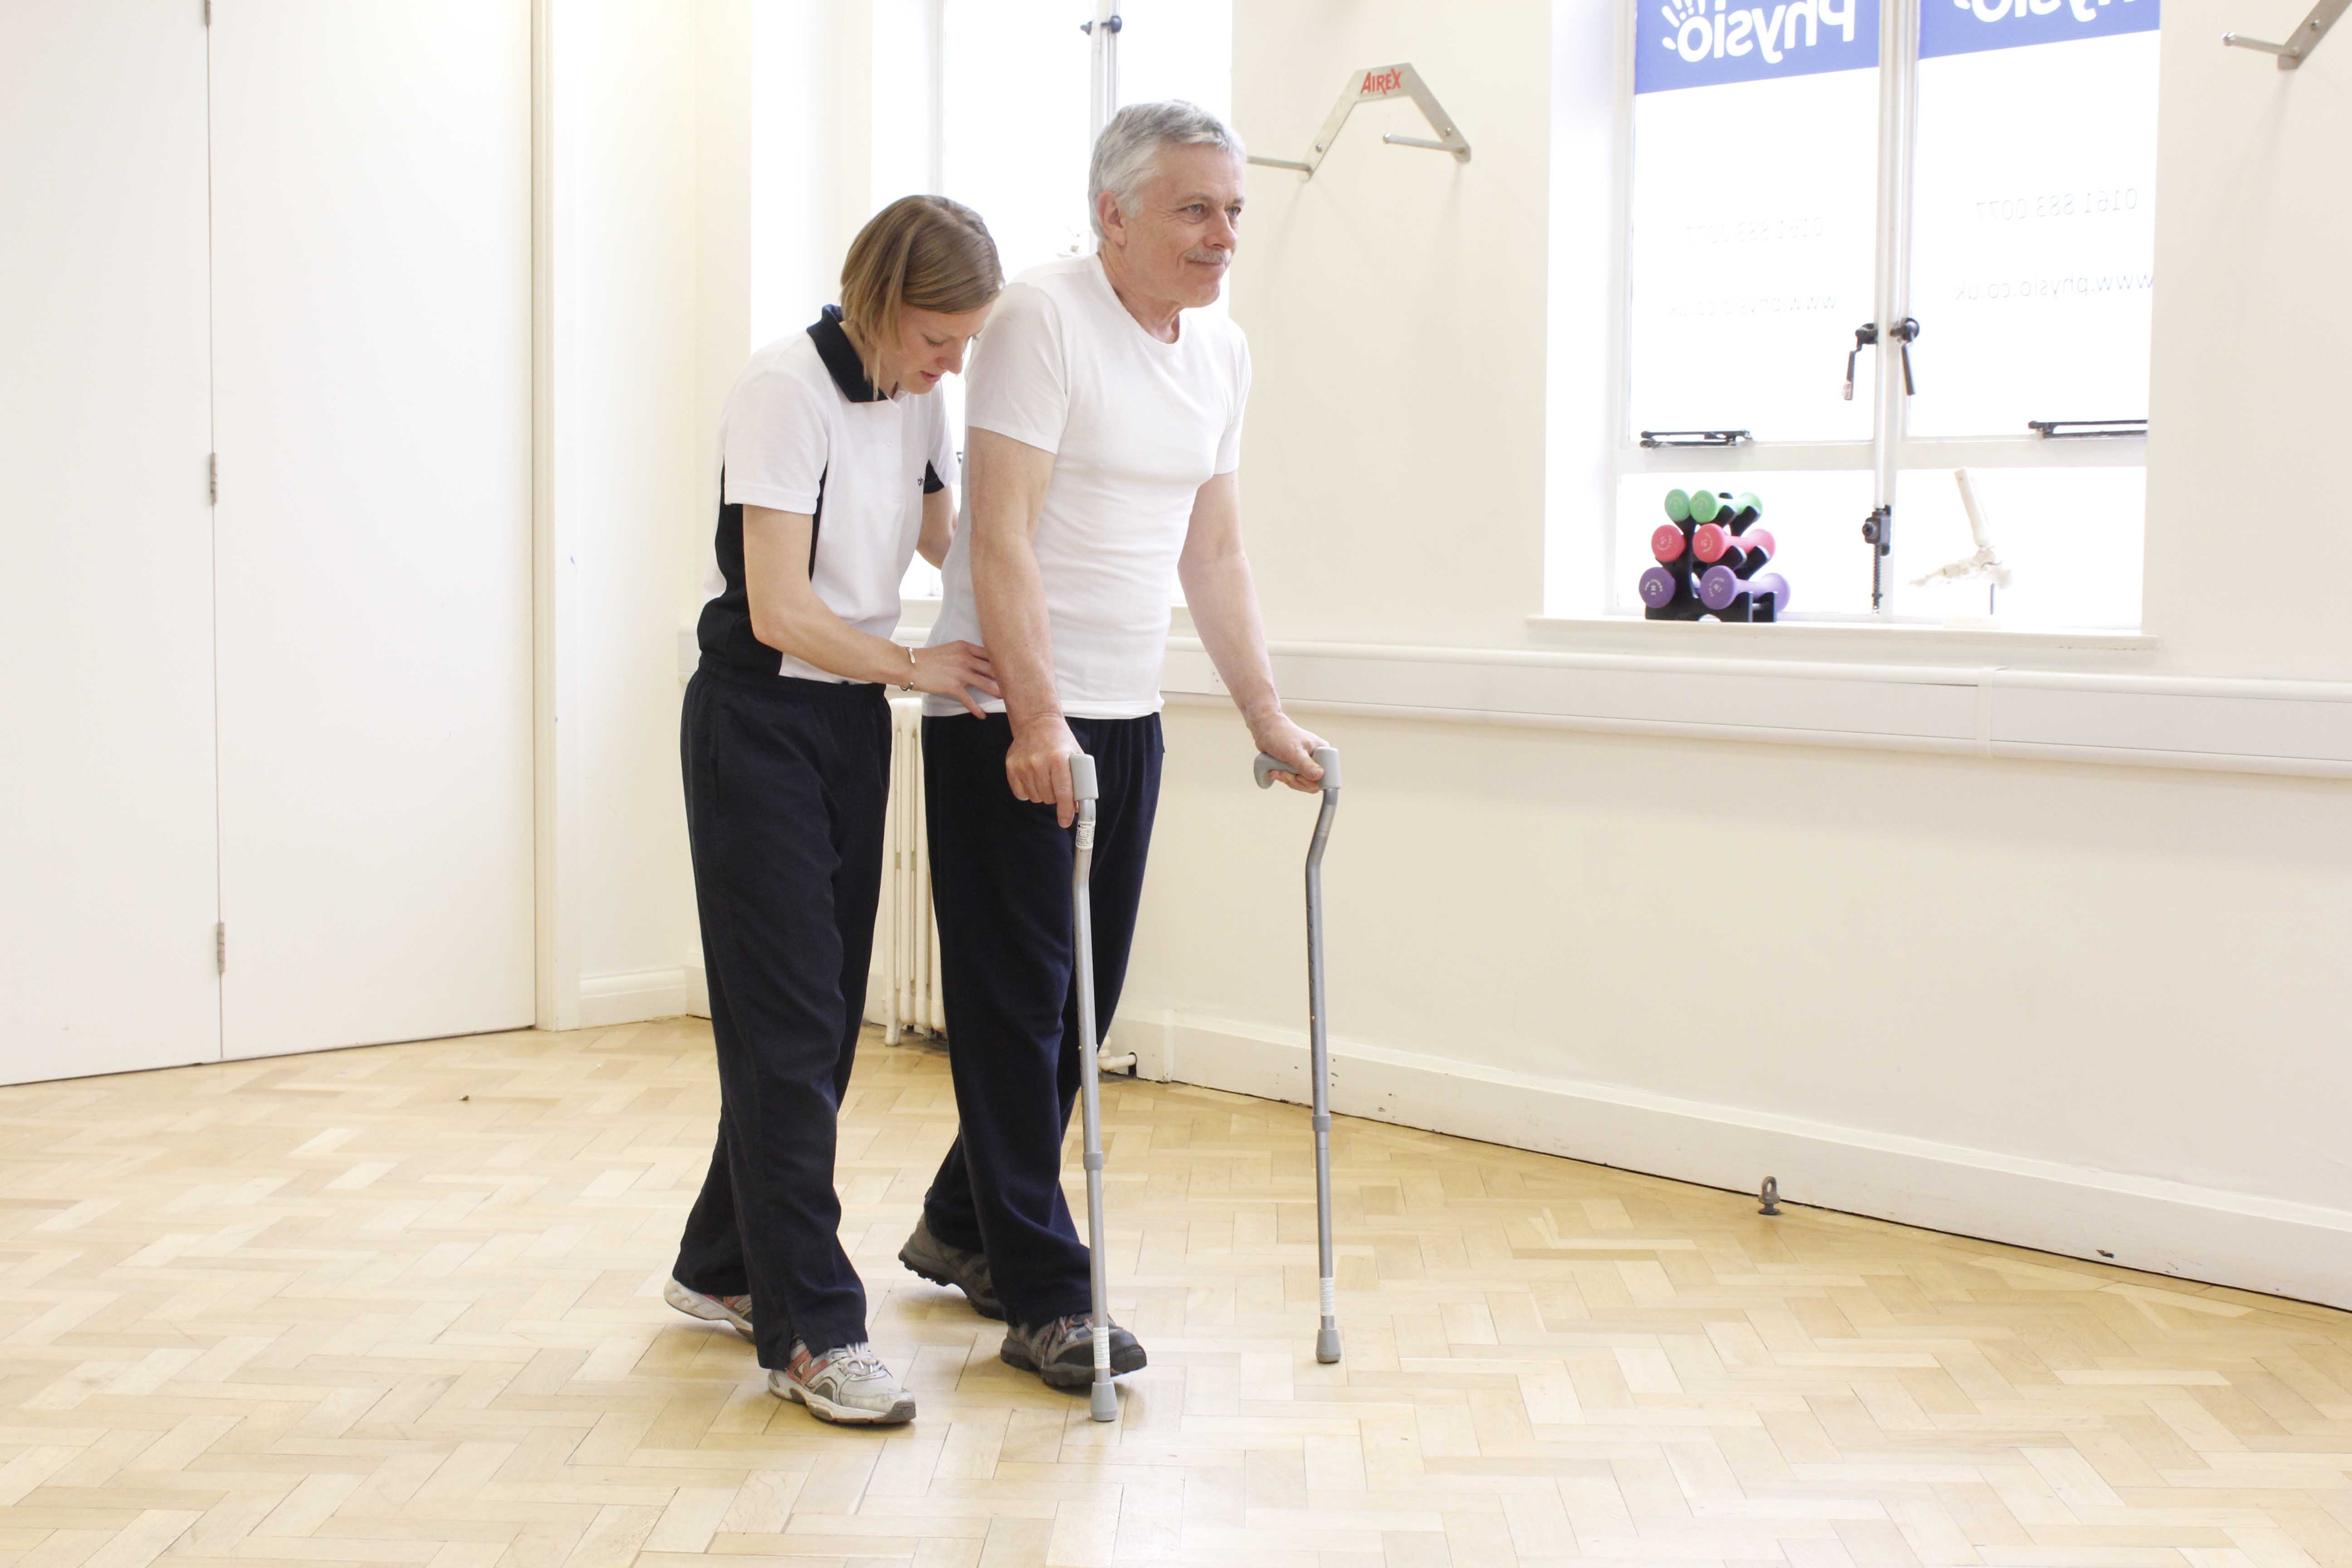 Mobility exercises using two walking sticks supervised by a neurological physiotherapist